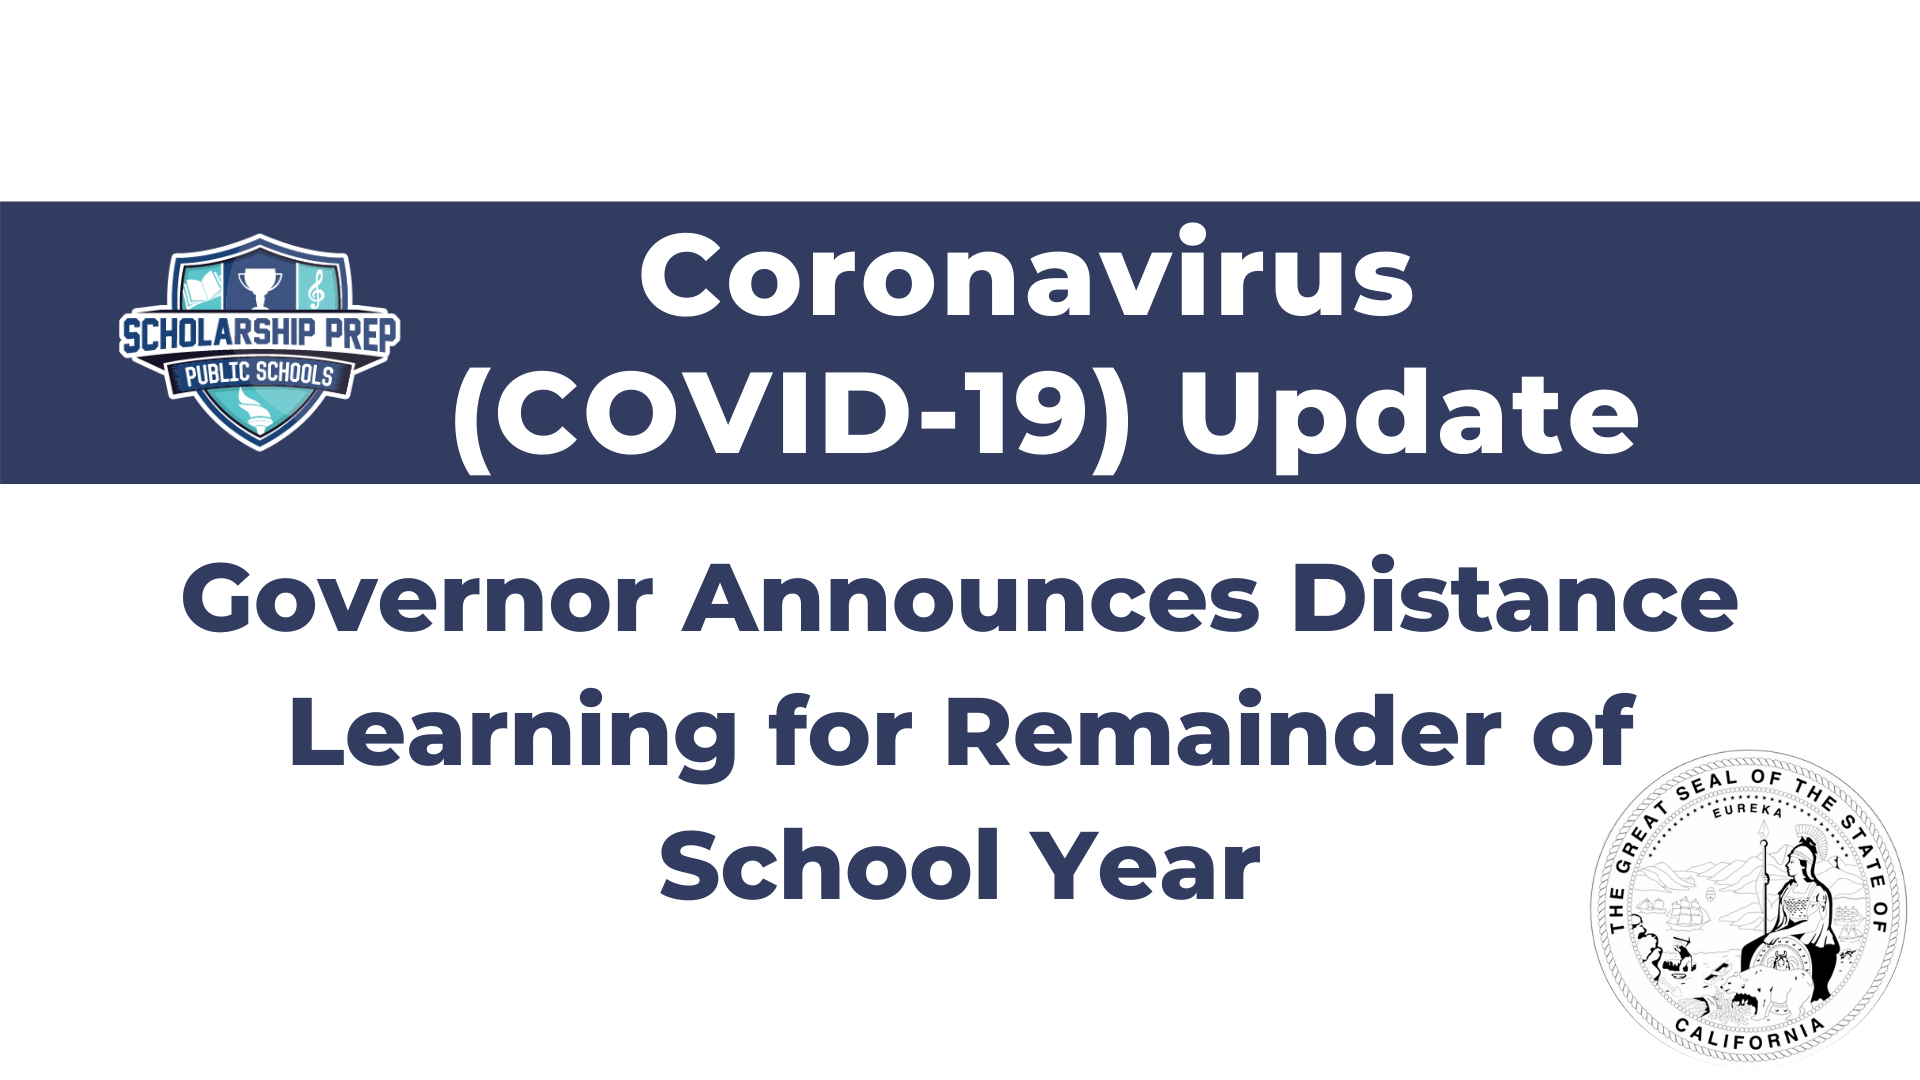 Message From Co-Founders Re: Distance Learning for 2019-20 School Year